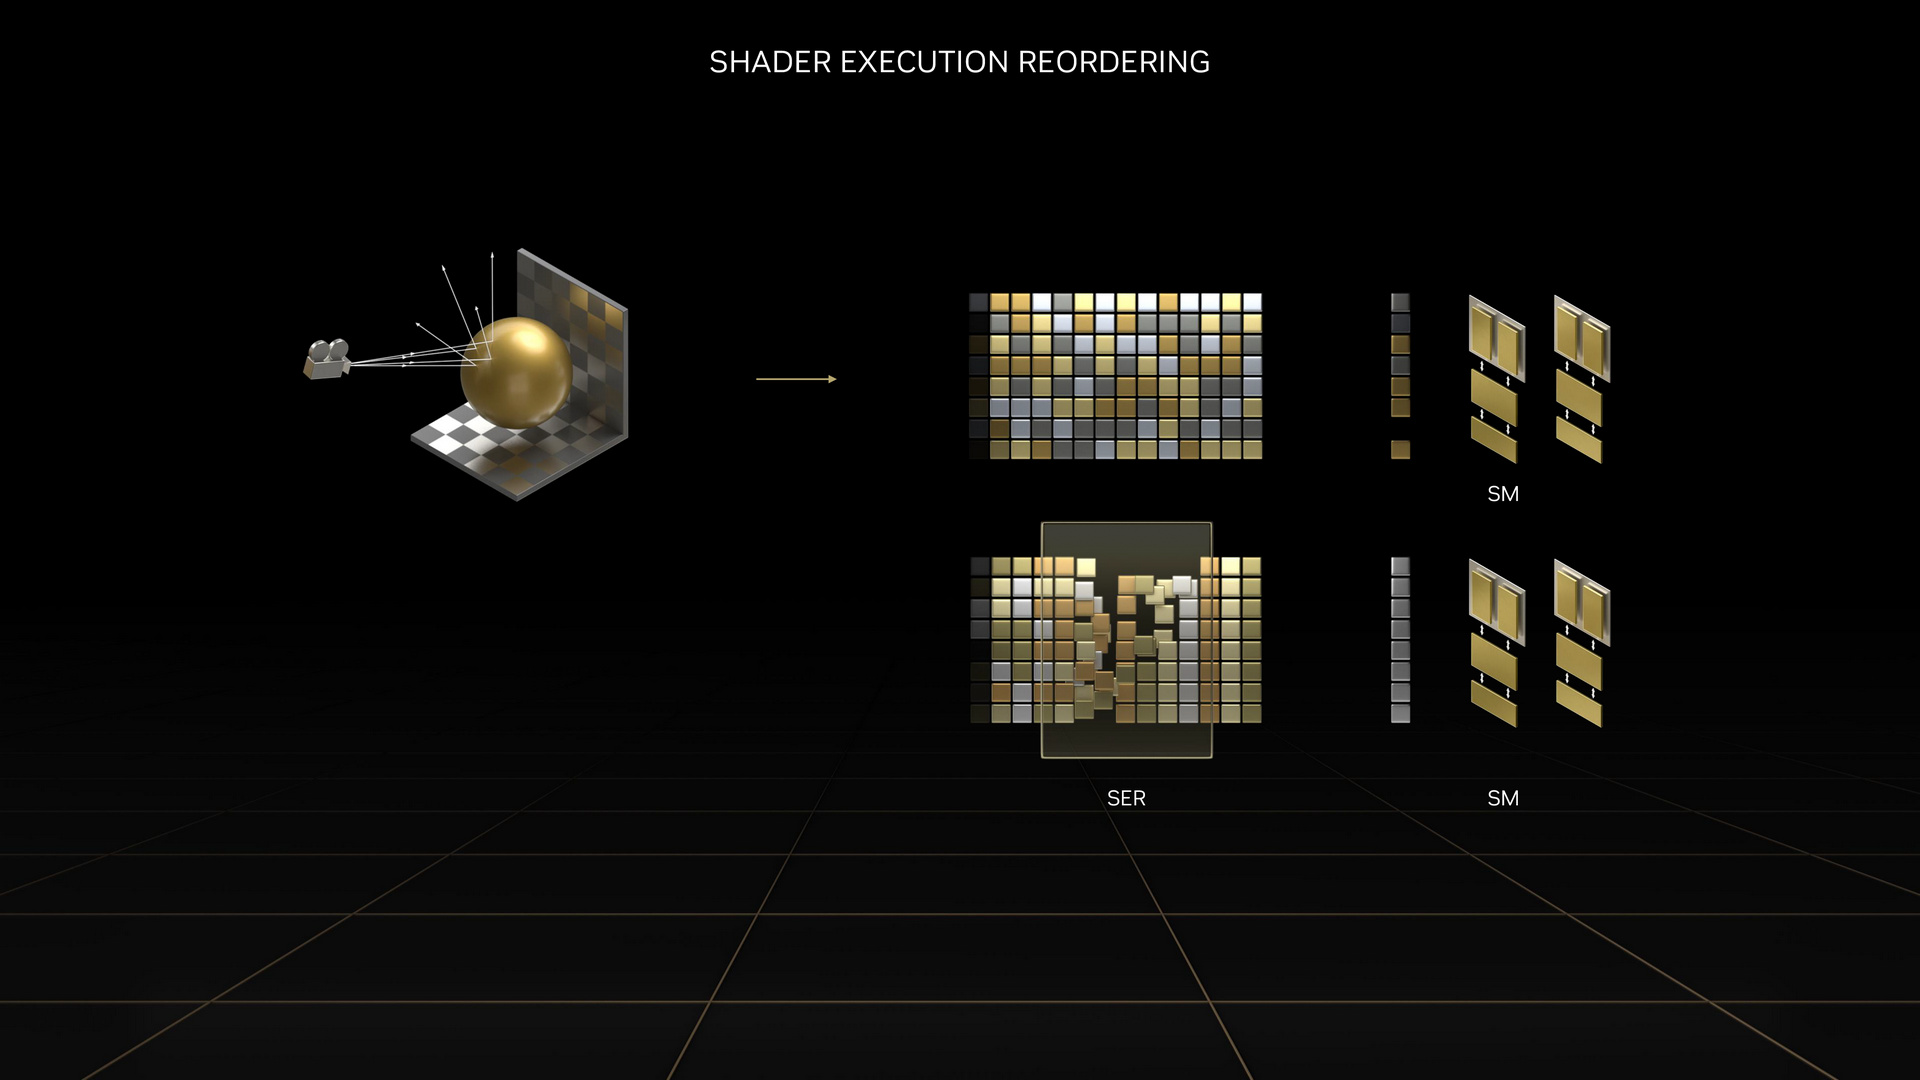 Shader Excution Reordering in NVIDIA Ada Lovelace Architecture